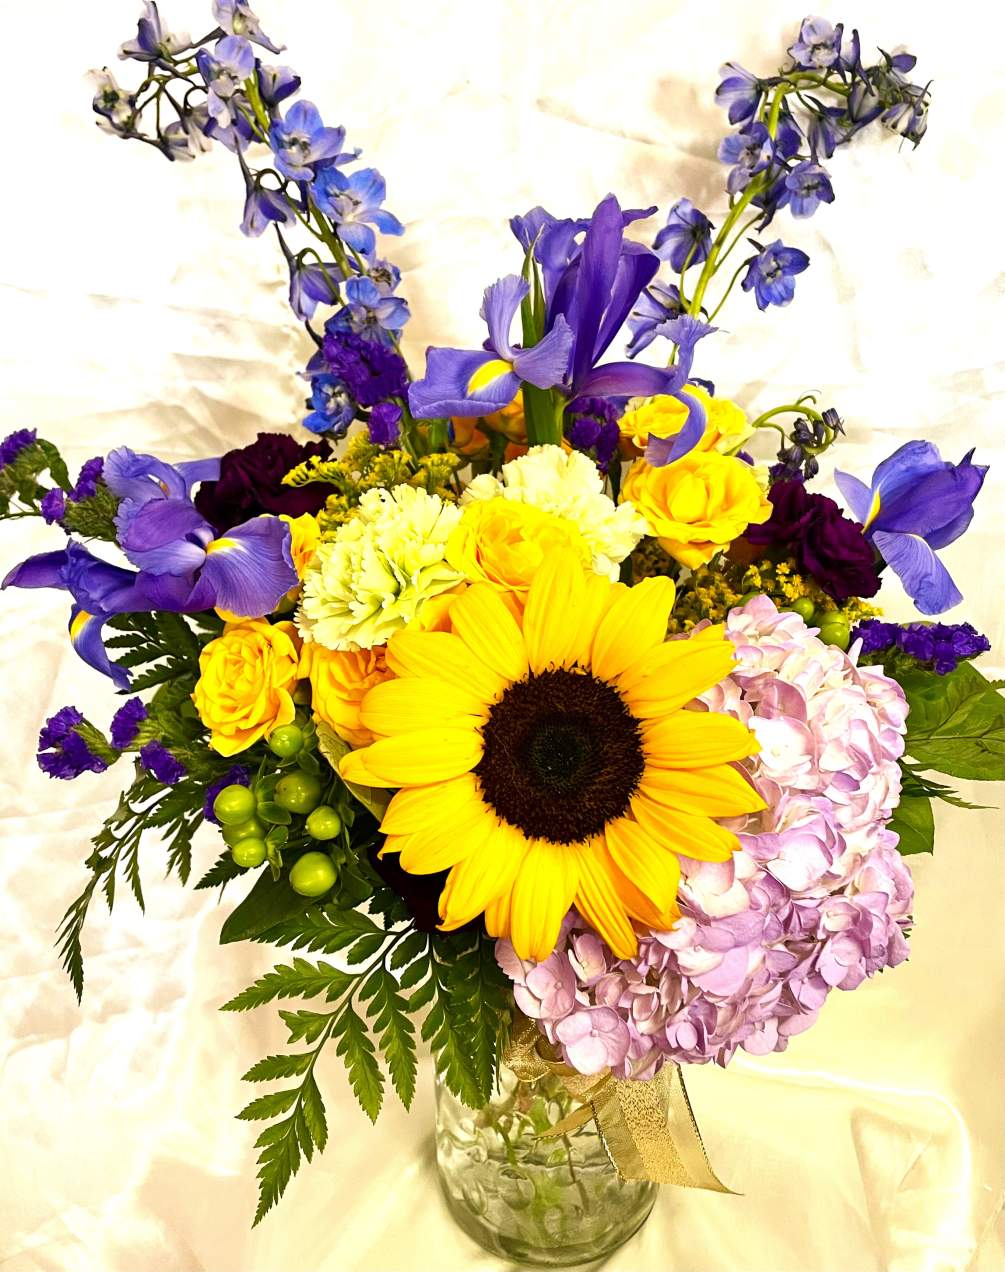 Gorgeous and colorful arrangement, sure to make anyone excited that spring is